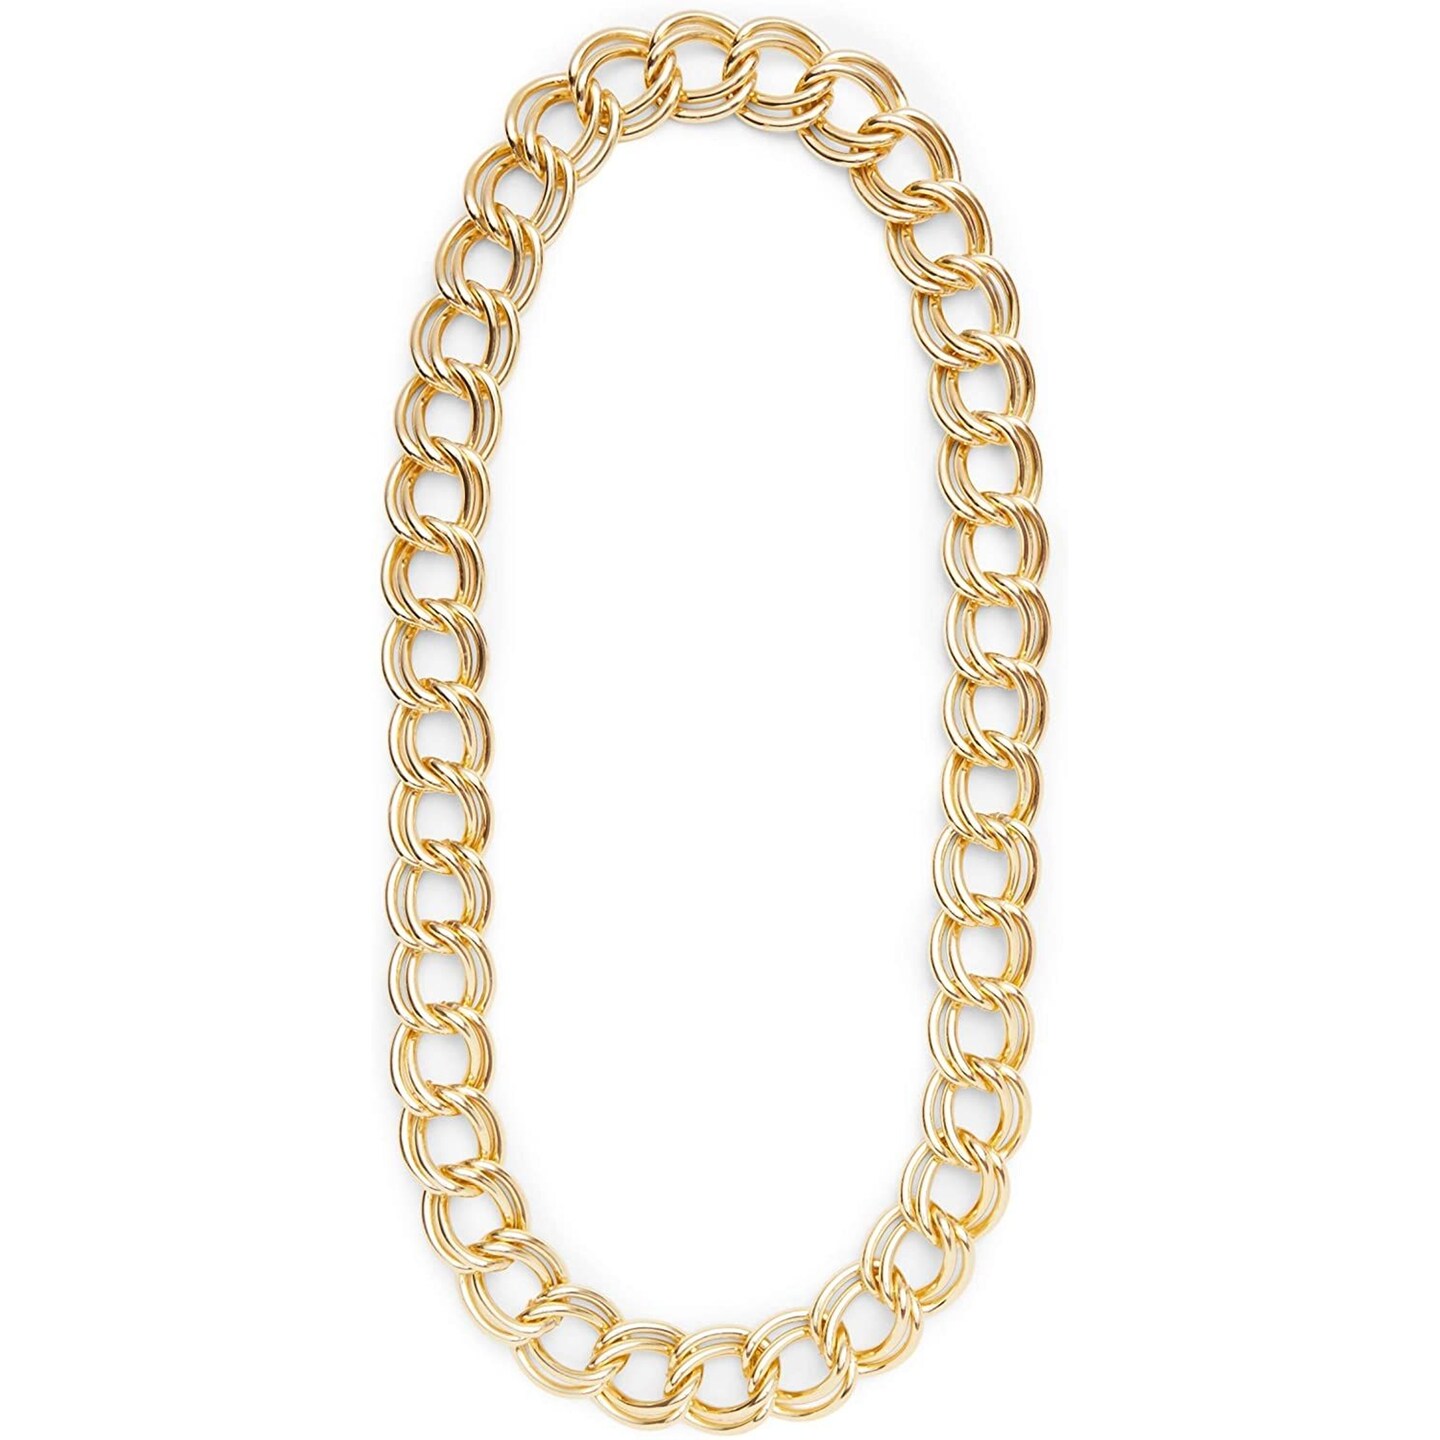 Gold Chunky Necklace, Cuban Link Chain, Hip Hop Accessories 36 inch